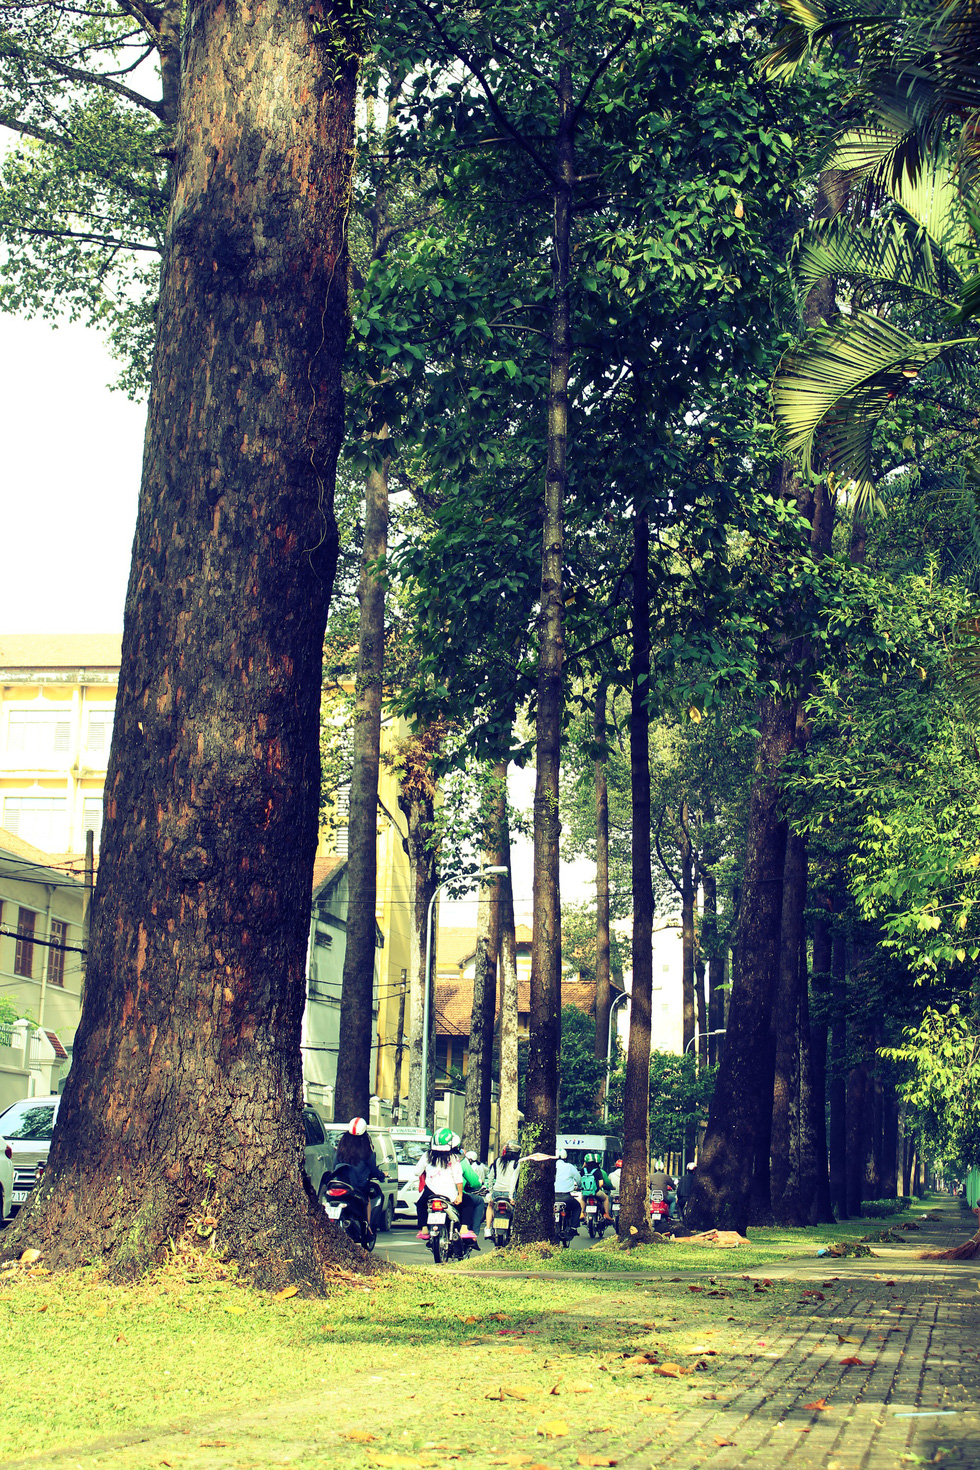 There are dozens of tall age-old trees on Nguyen Binh Khiem Street in District 1.